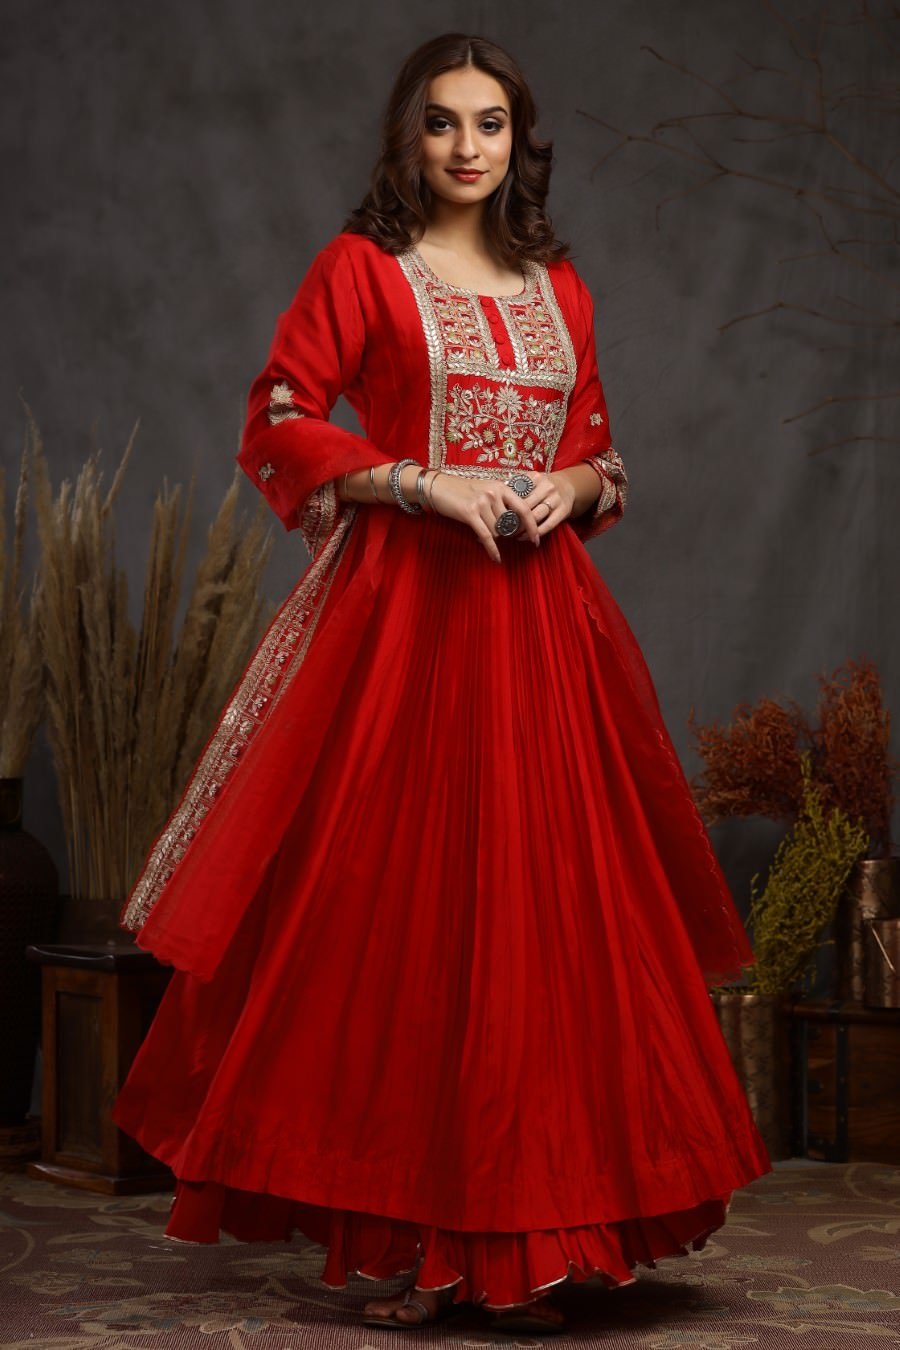 Red Modal Silk Long Enkle Length Stylish Dress And Dupatta With Embroidery